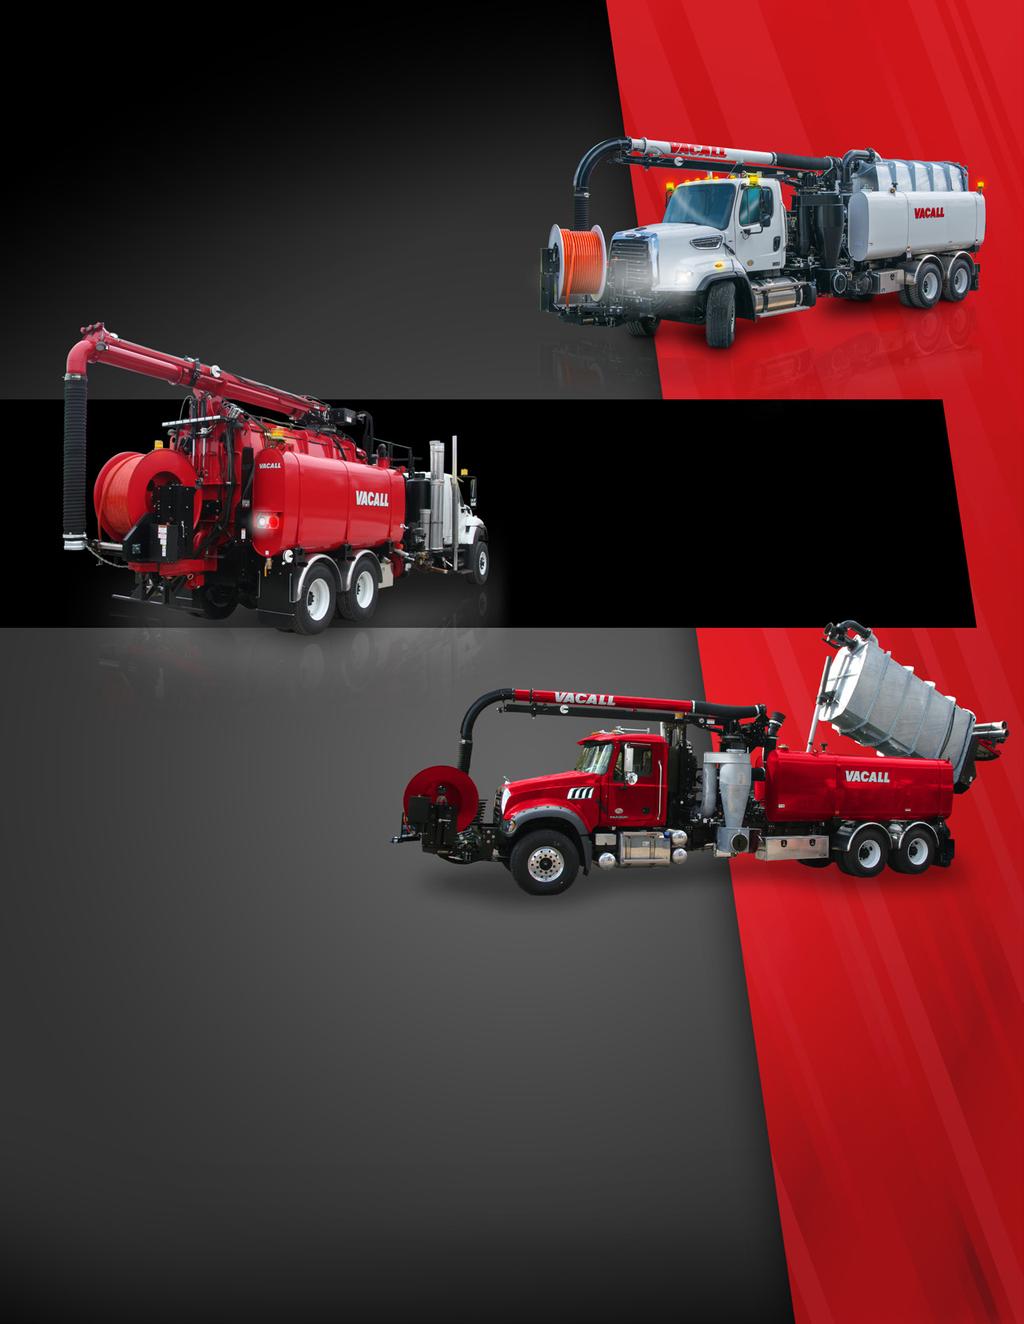 CHOOSE THE MODEL AND FEATURES YOU WANT P Series AllJetVac P Series combination sewer cleaner models use a positive displacement blower system that sets the industry standard for high performance and